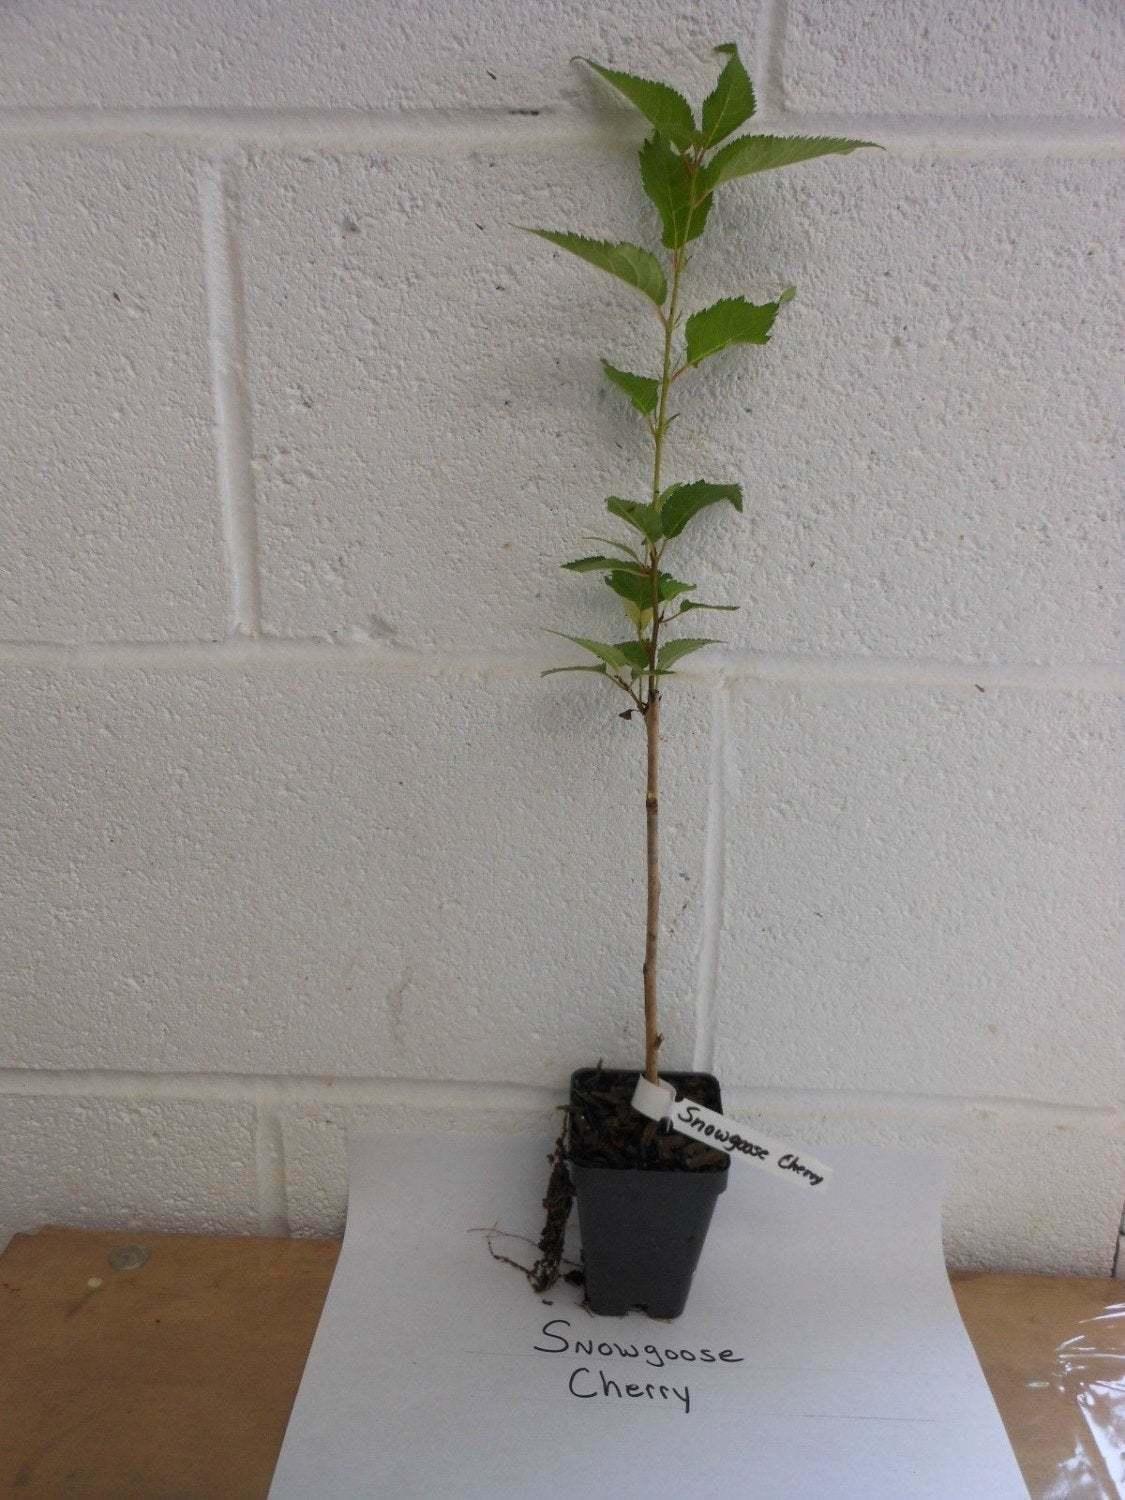 Snowgoose Flowering Cherry Tree - Live Plant - 6-14" Tall Seedling - 2.5" Pot - The Nursery Center